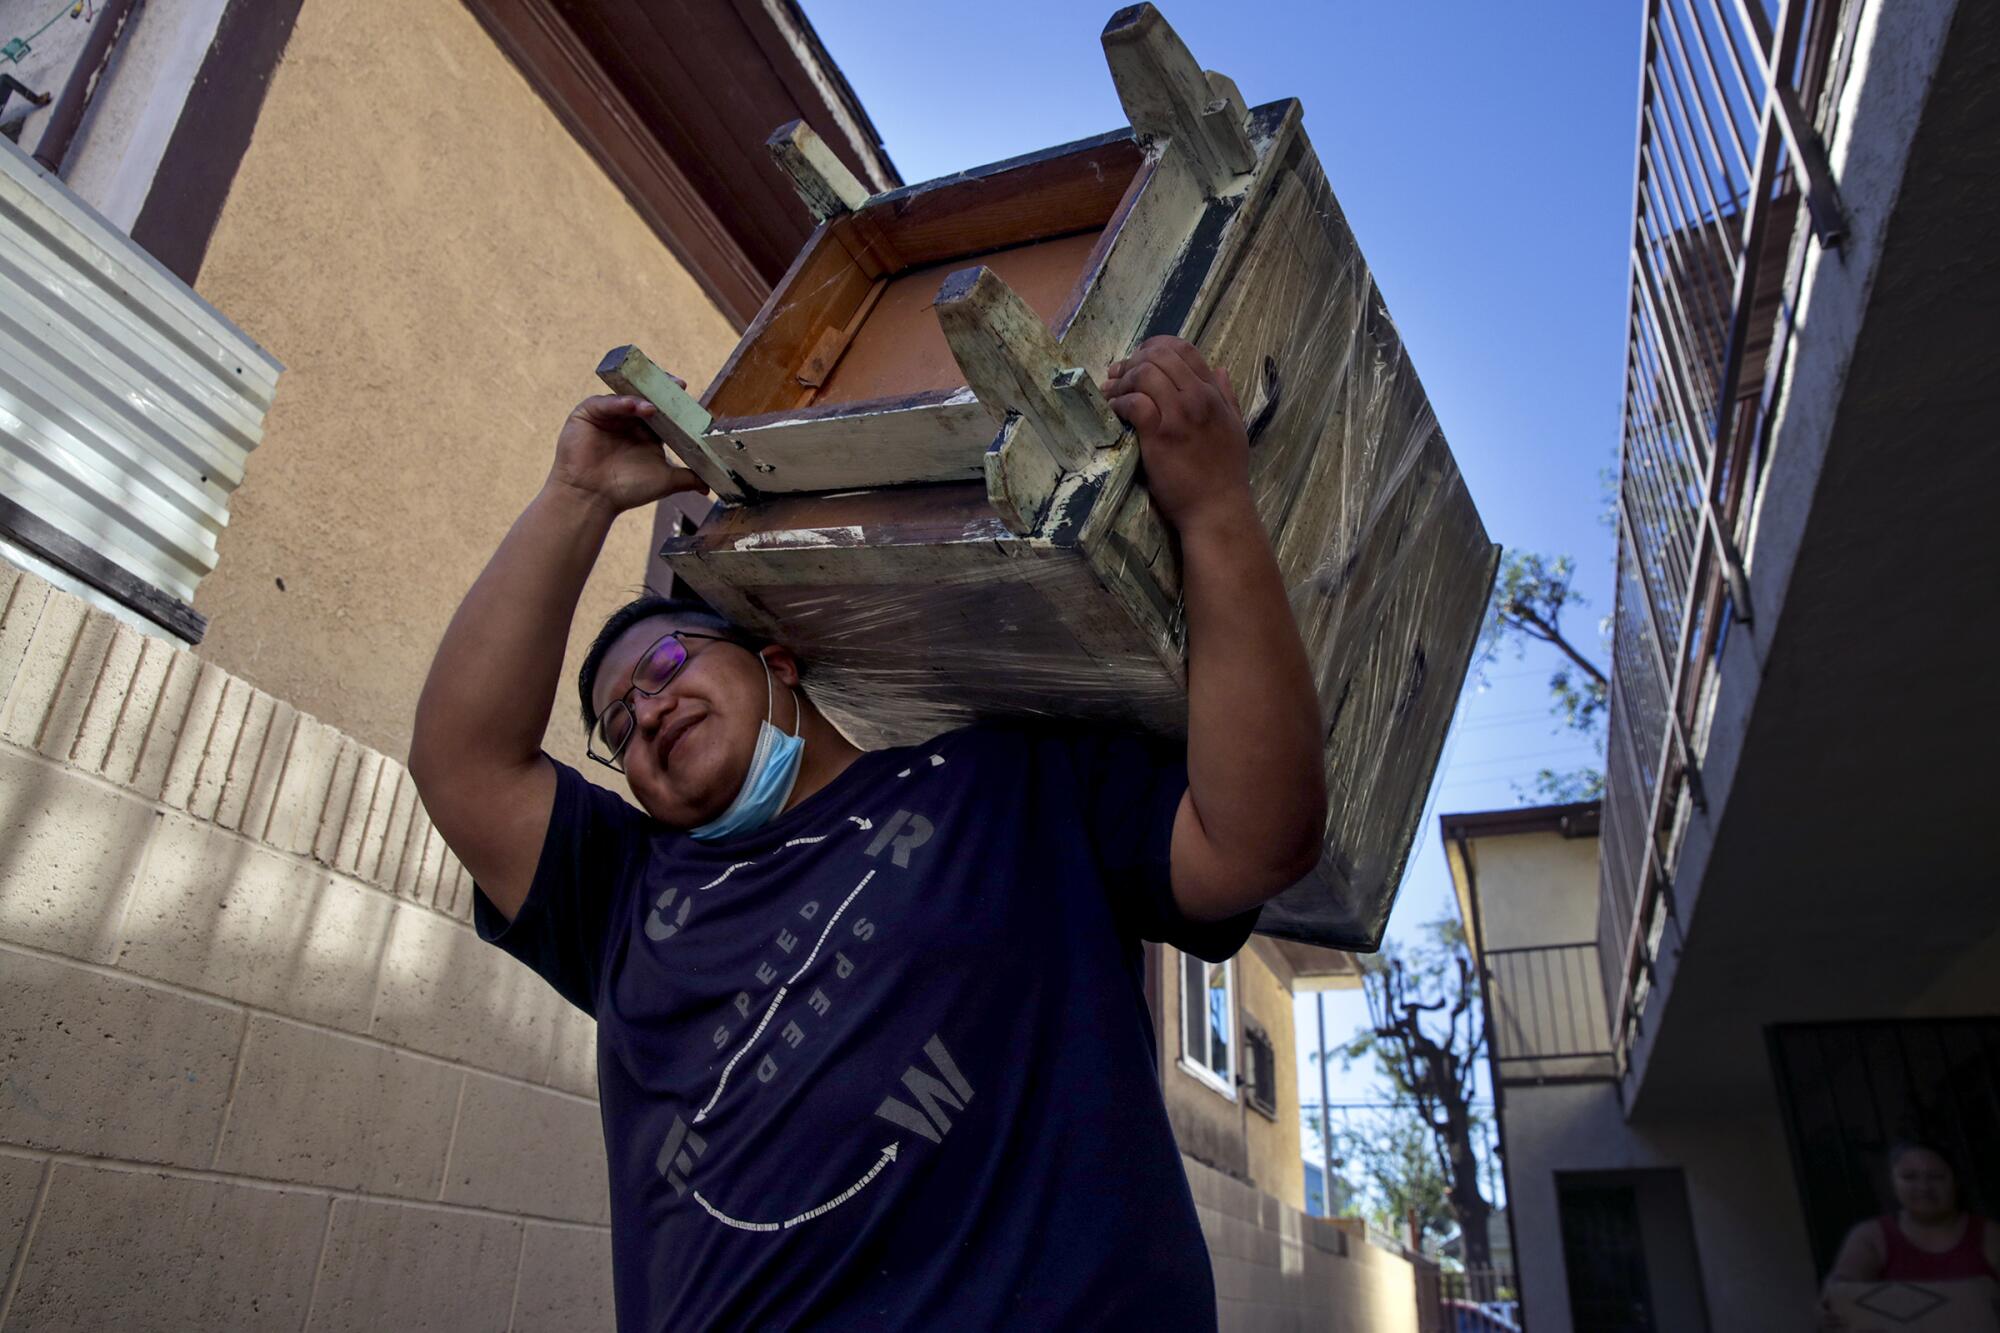 Jafet Martinez Oceguera helps the family move out of their apartment in the 700 block of East 27th Street in South L.A.